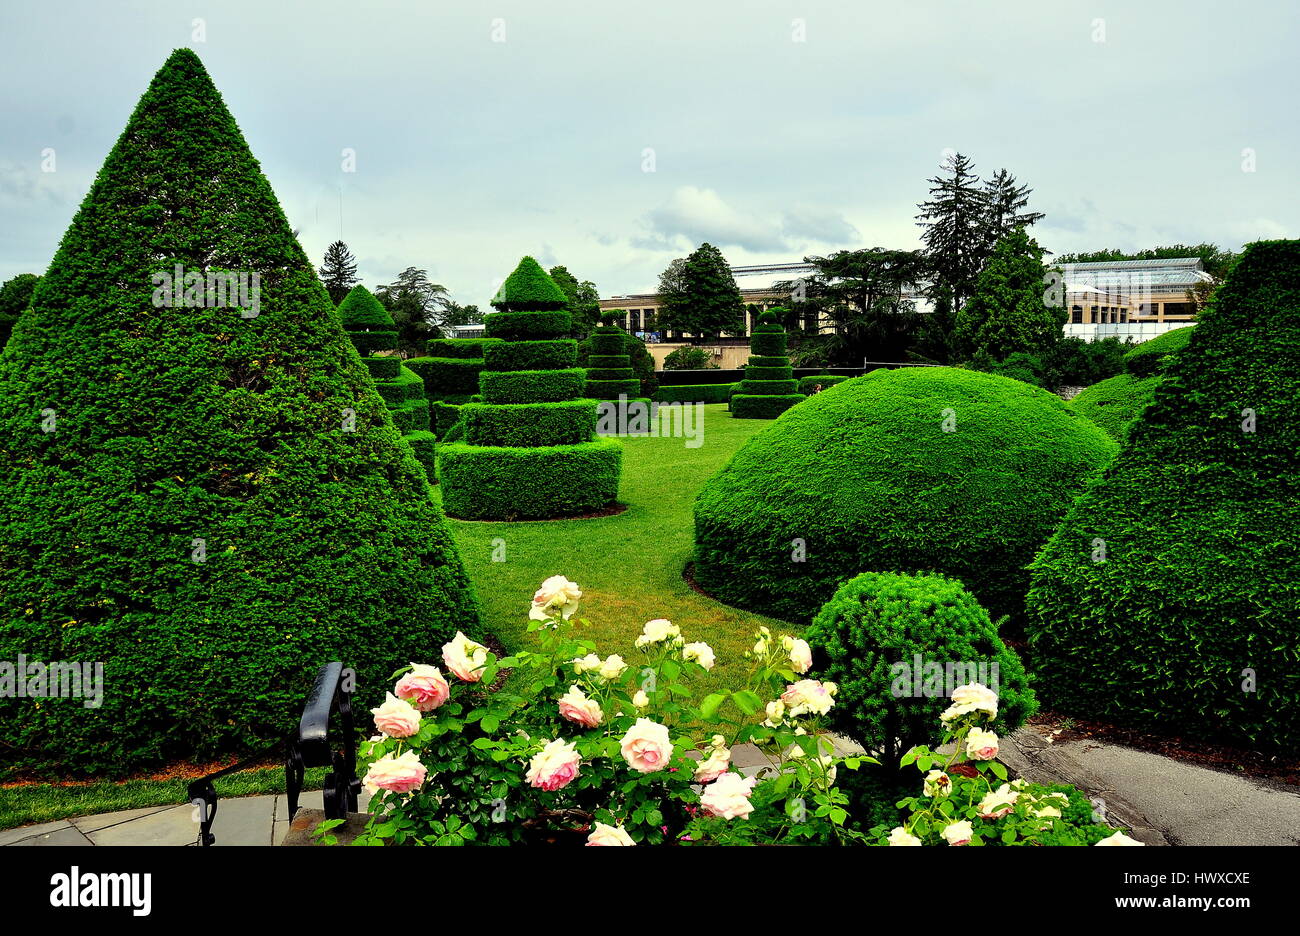 Kennett Square, Pennsylvania - June 3, 2015:  Clipped taxus (yew) trees in the Topiary Garden at Longwood Gardens   * Stock Photo